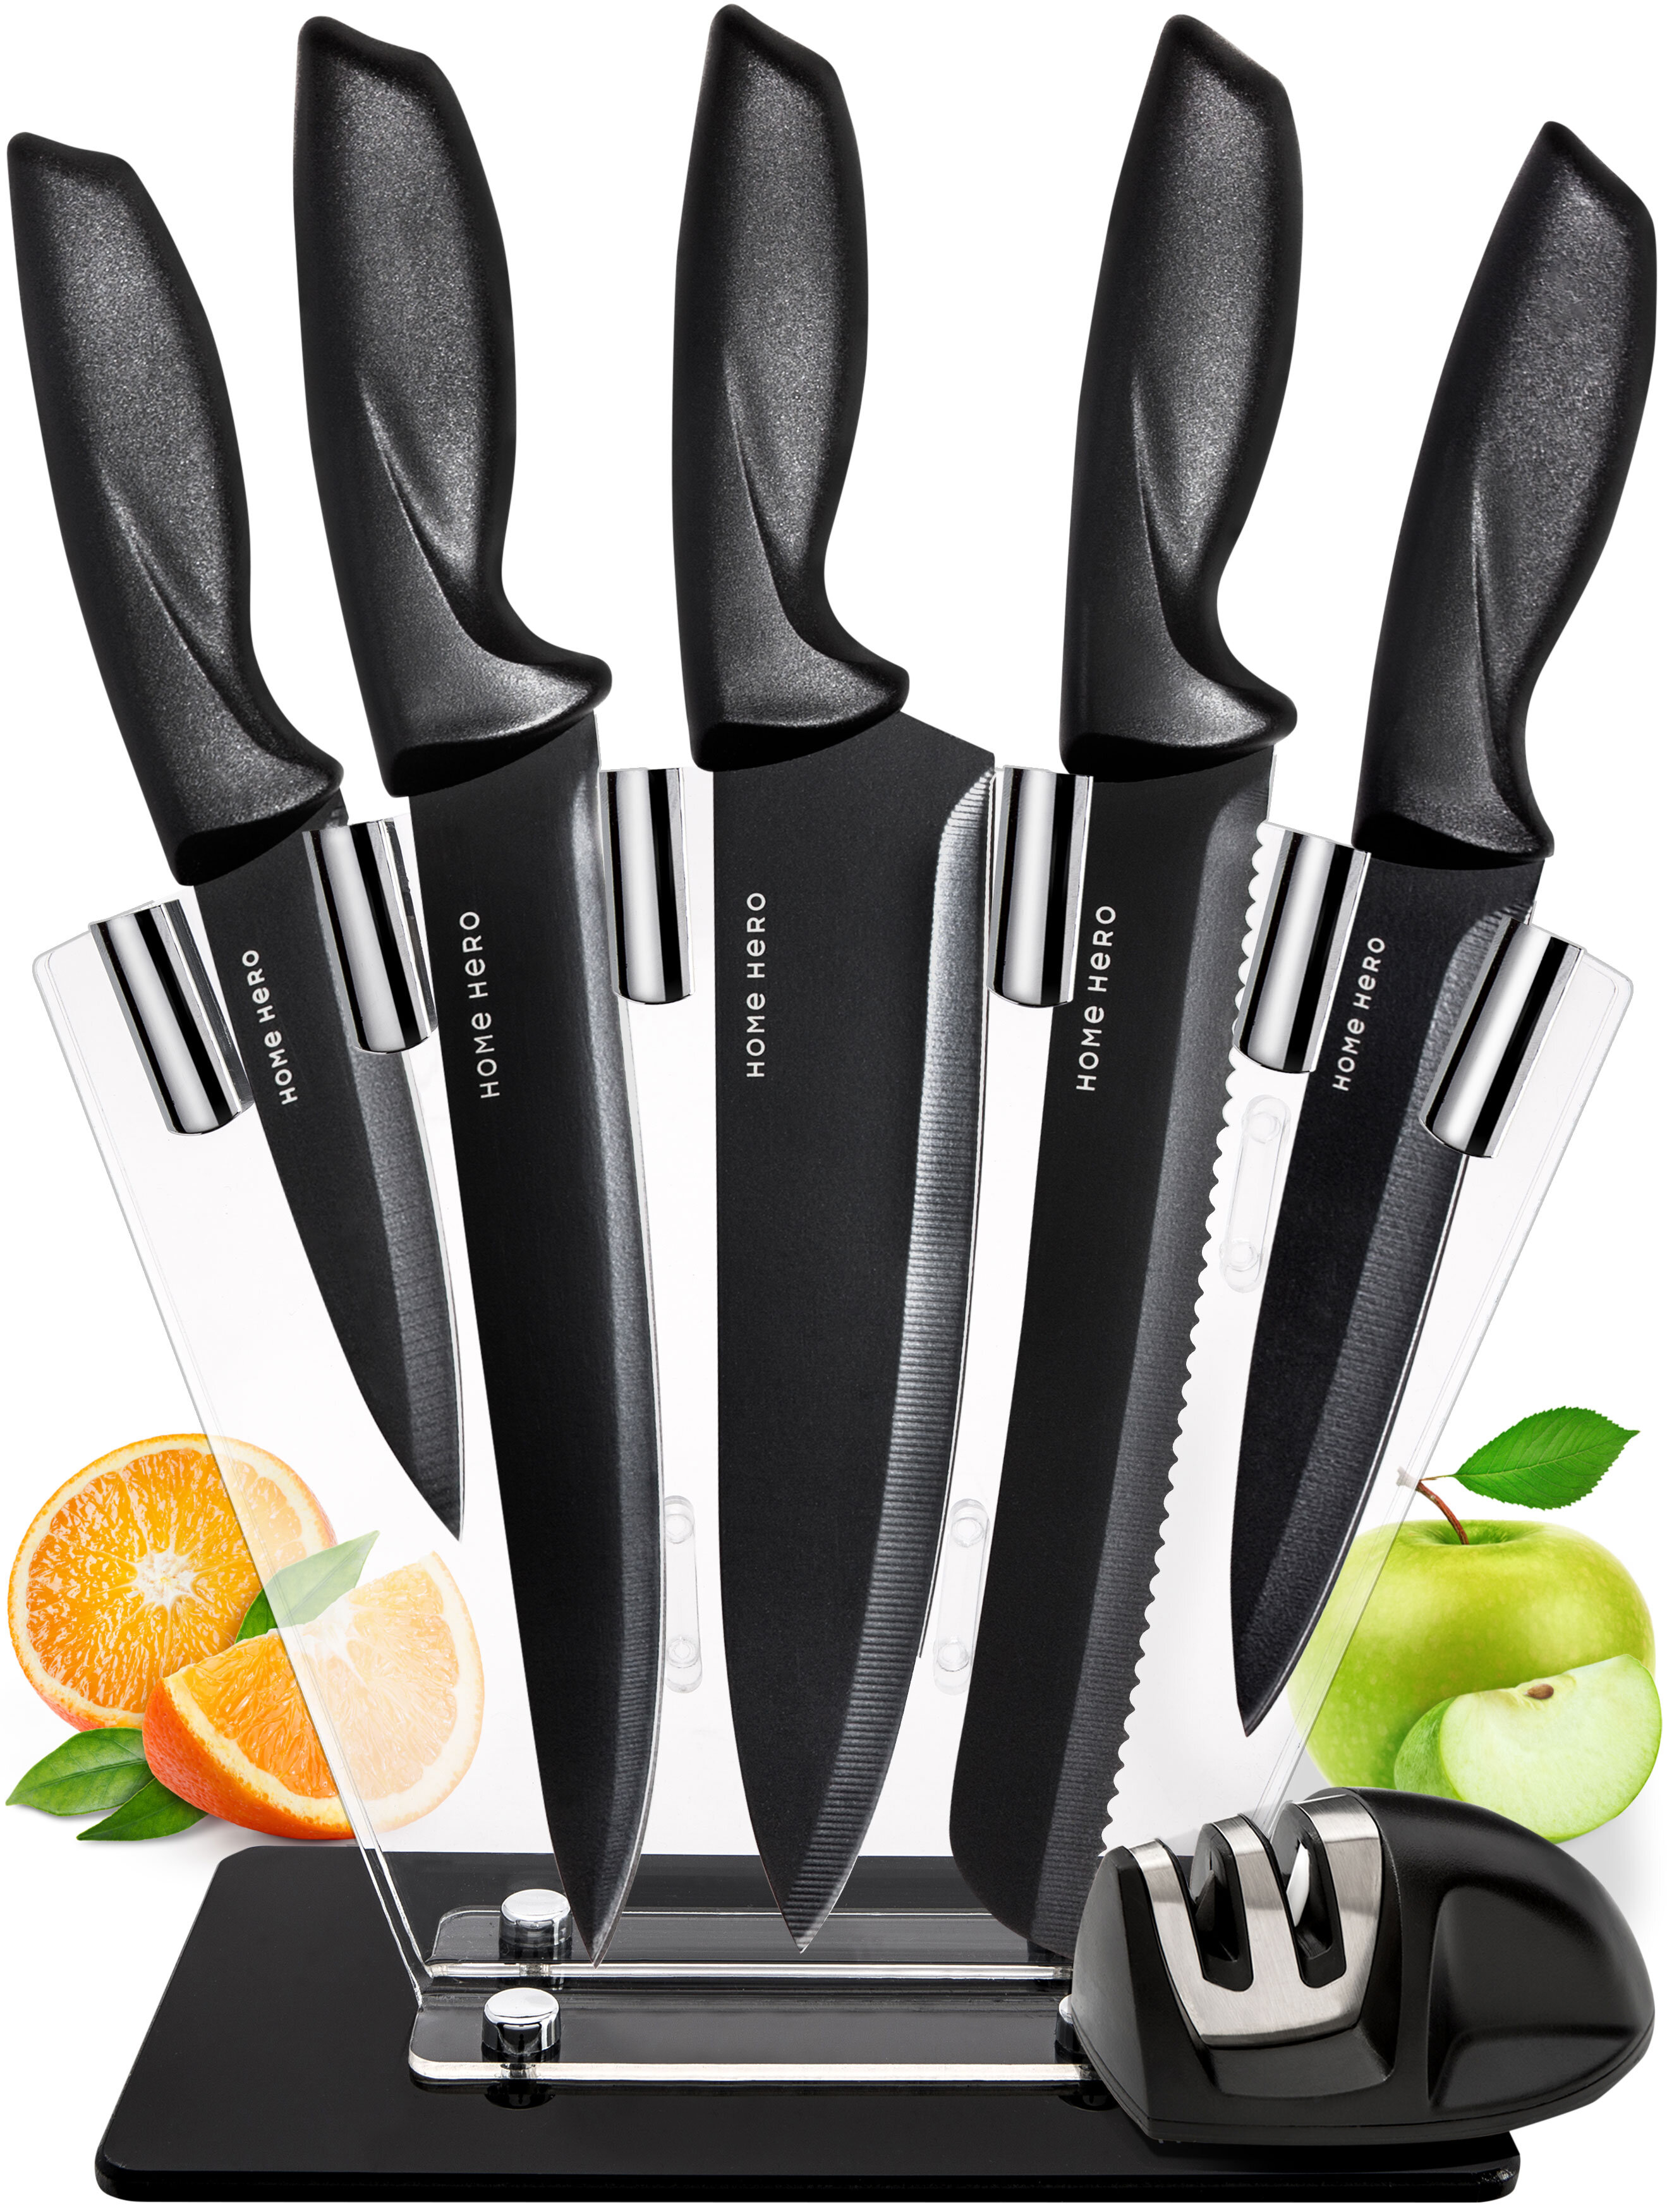 Rainbow Kitchen Knife Set Non Stick Knives Set with Block Thick Blade  Cutlery Knife Block Sets Chef Sharp Quality for Home & Pro Use Best Gift  (Orange